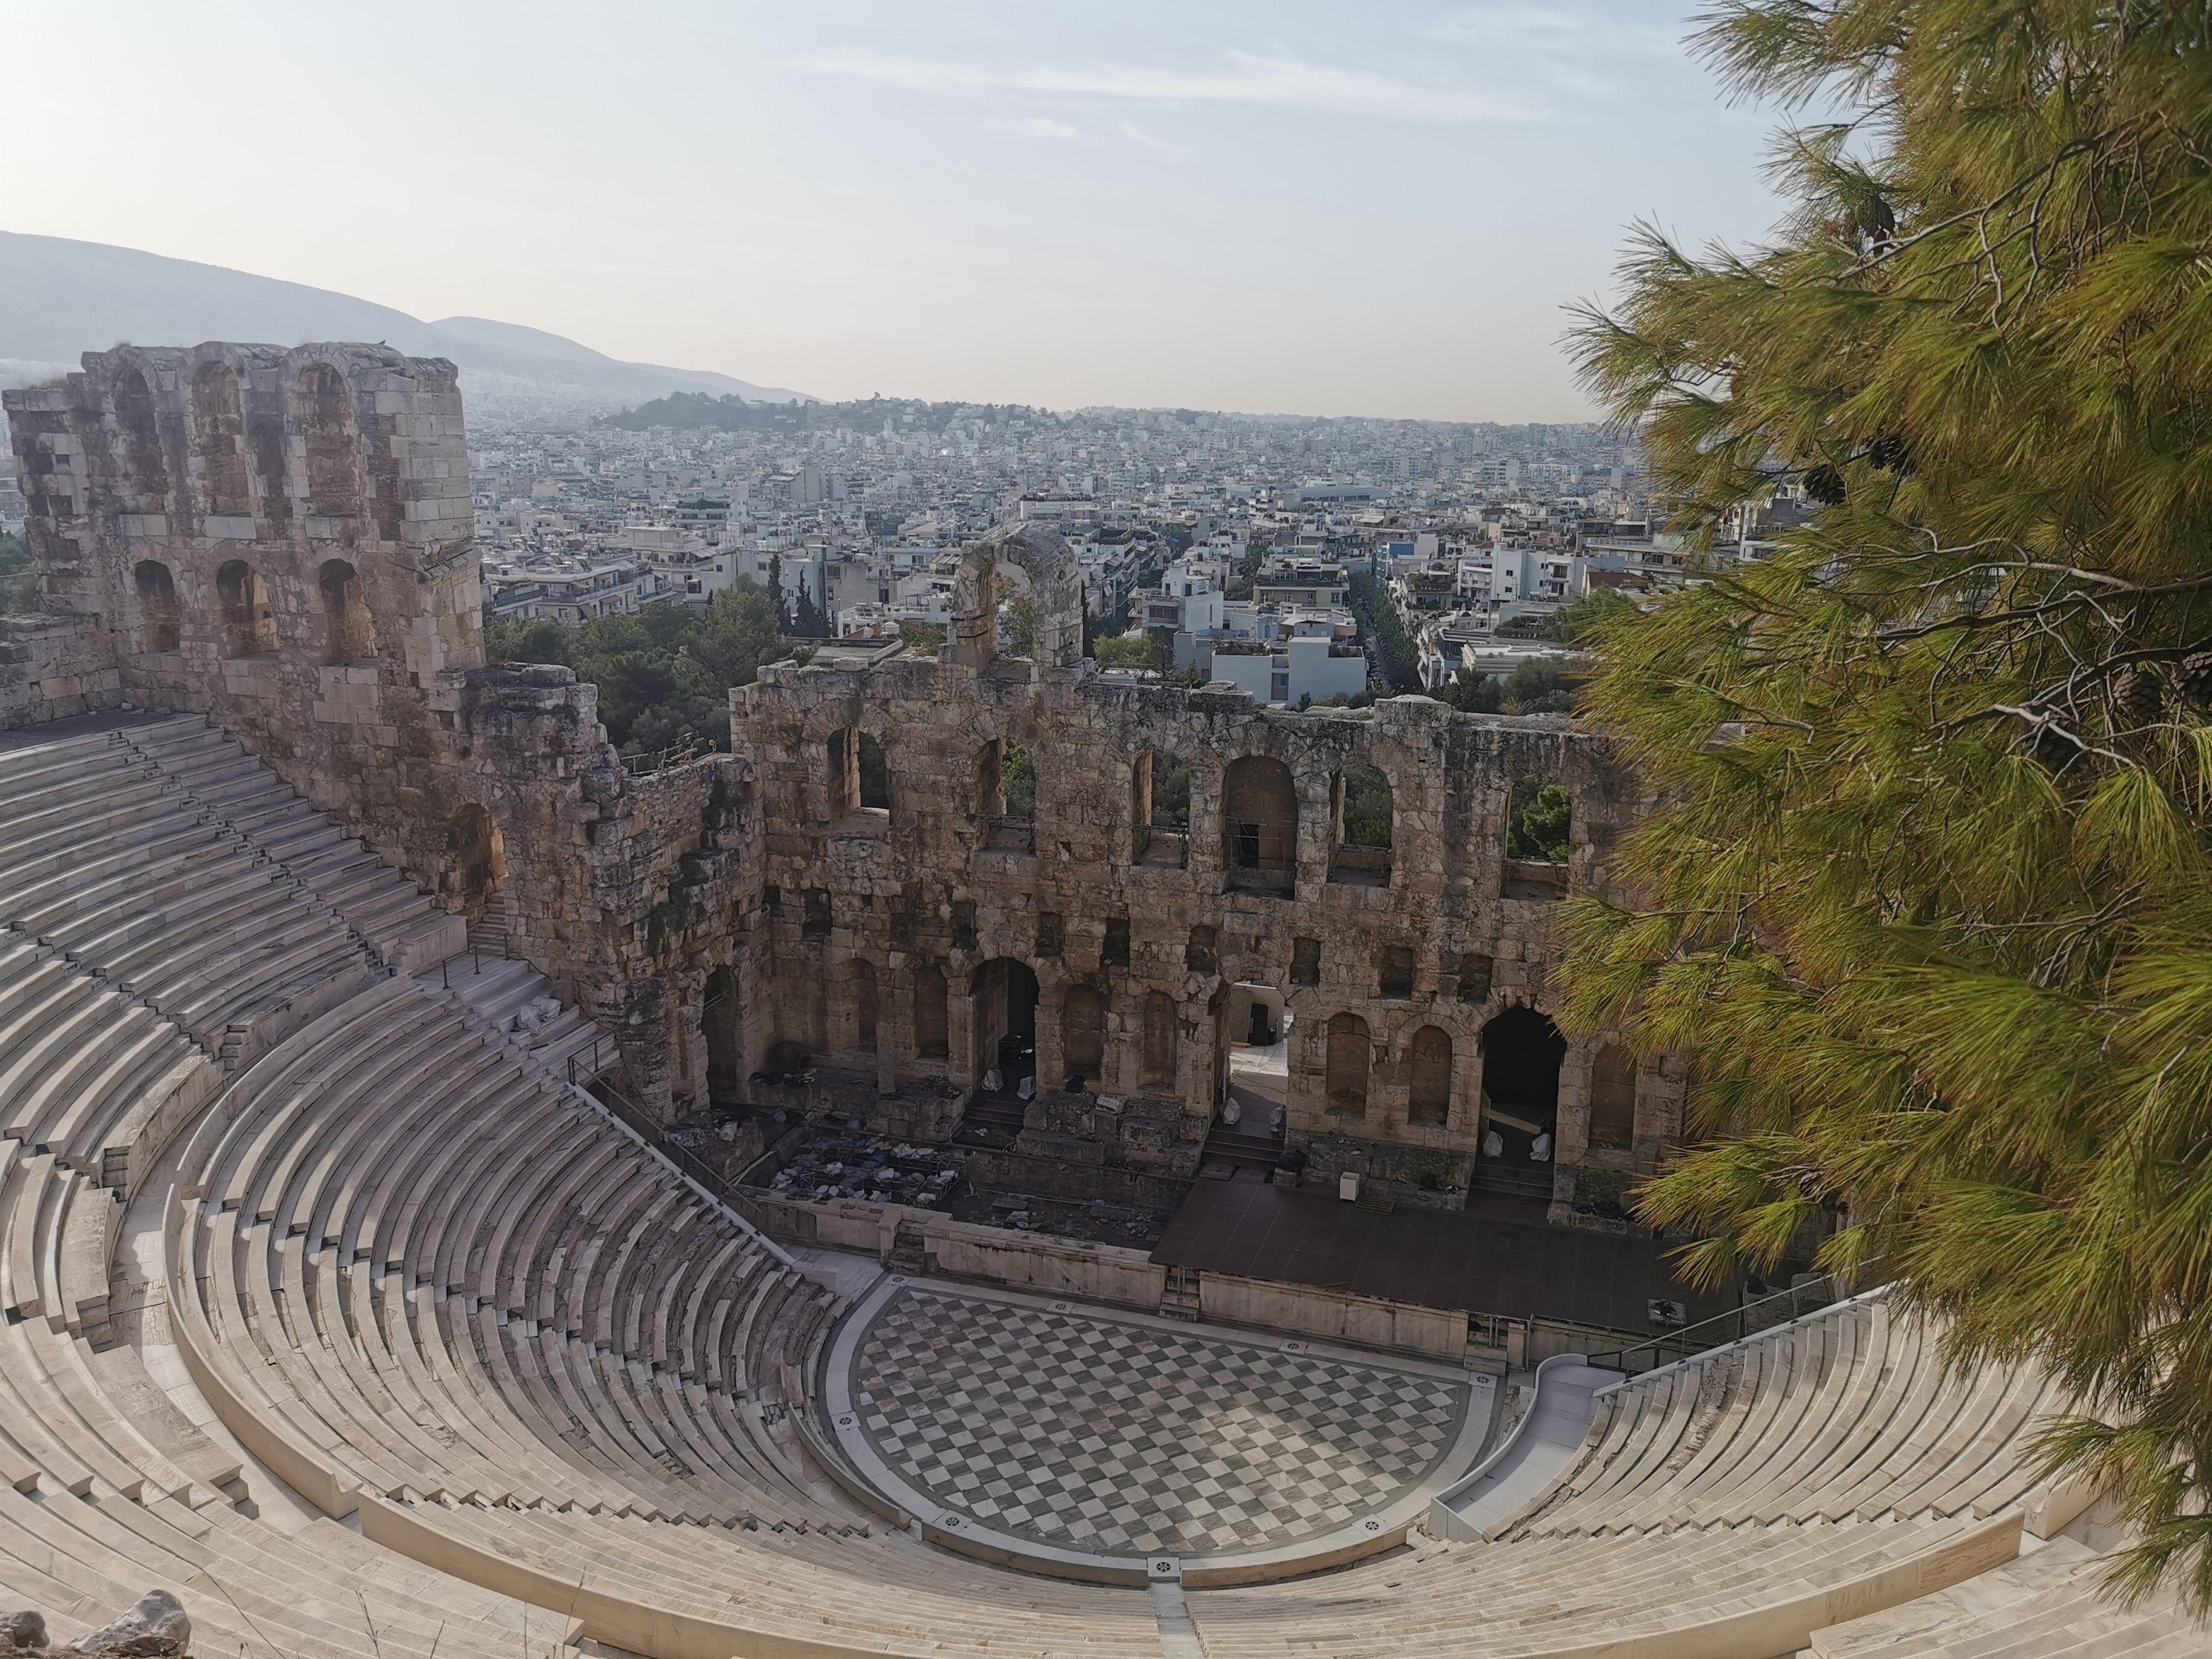 Athens is awash with historical ruins